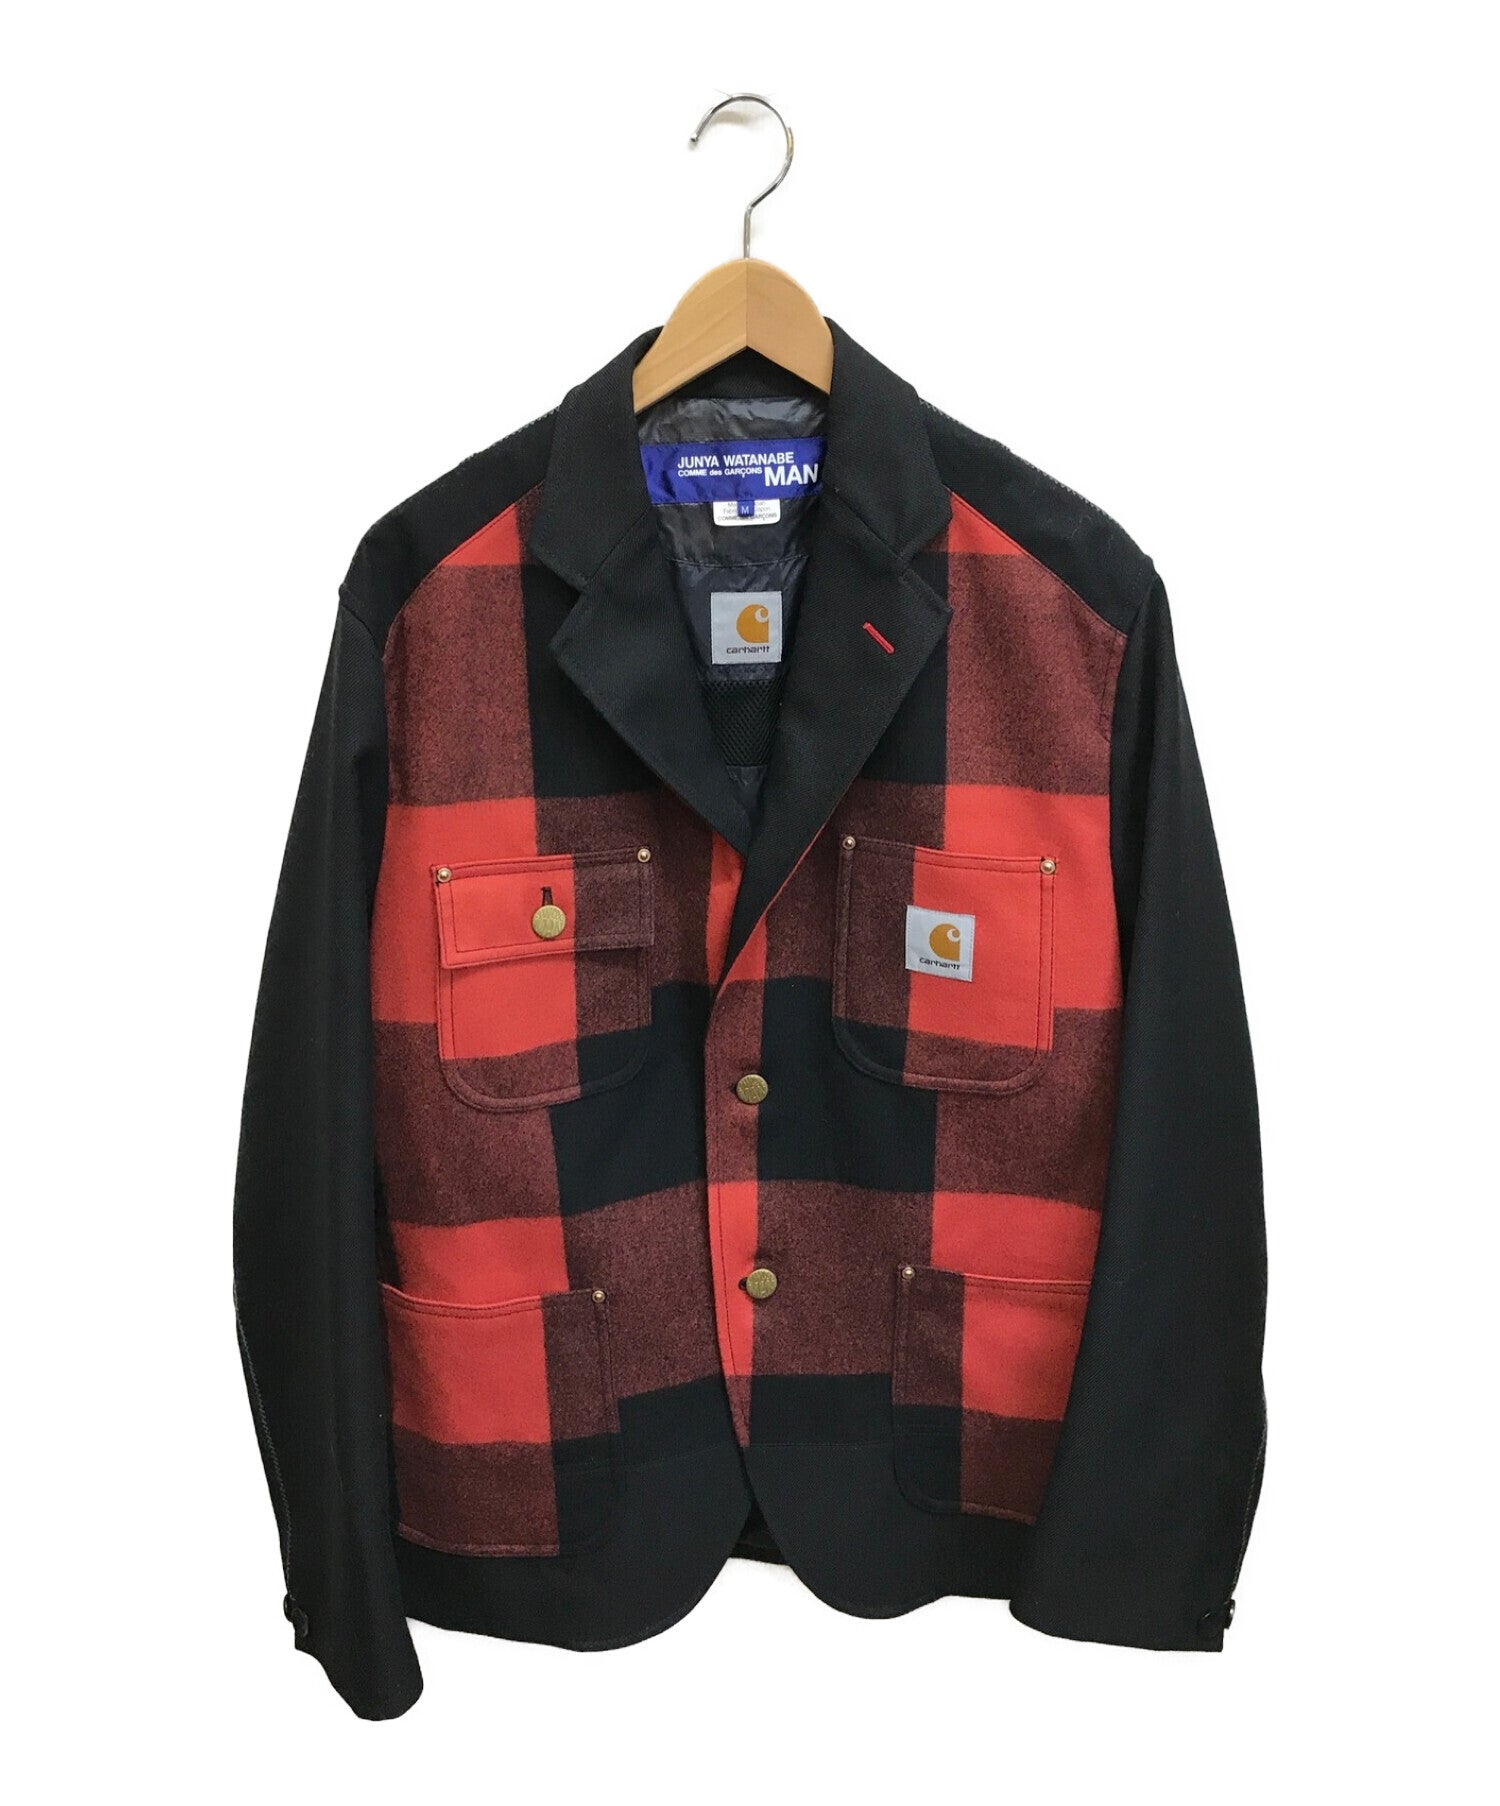 COMME des GARCONS JUNYA WATANABE MAN Wool Surge Duck-Switched